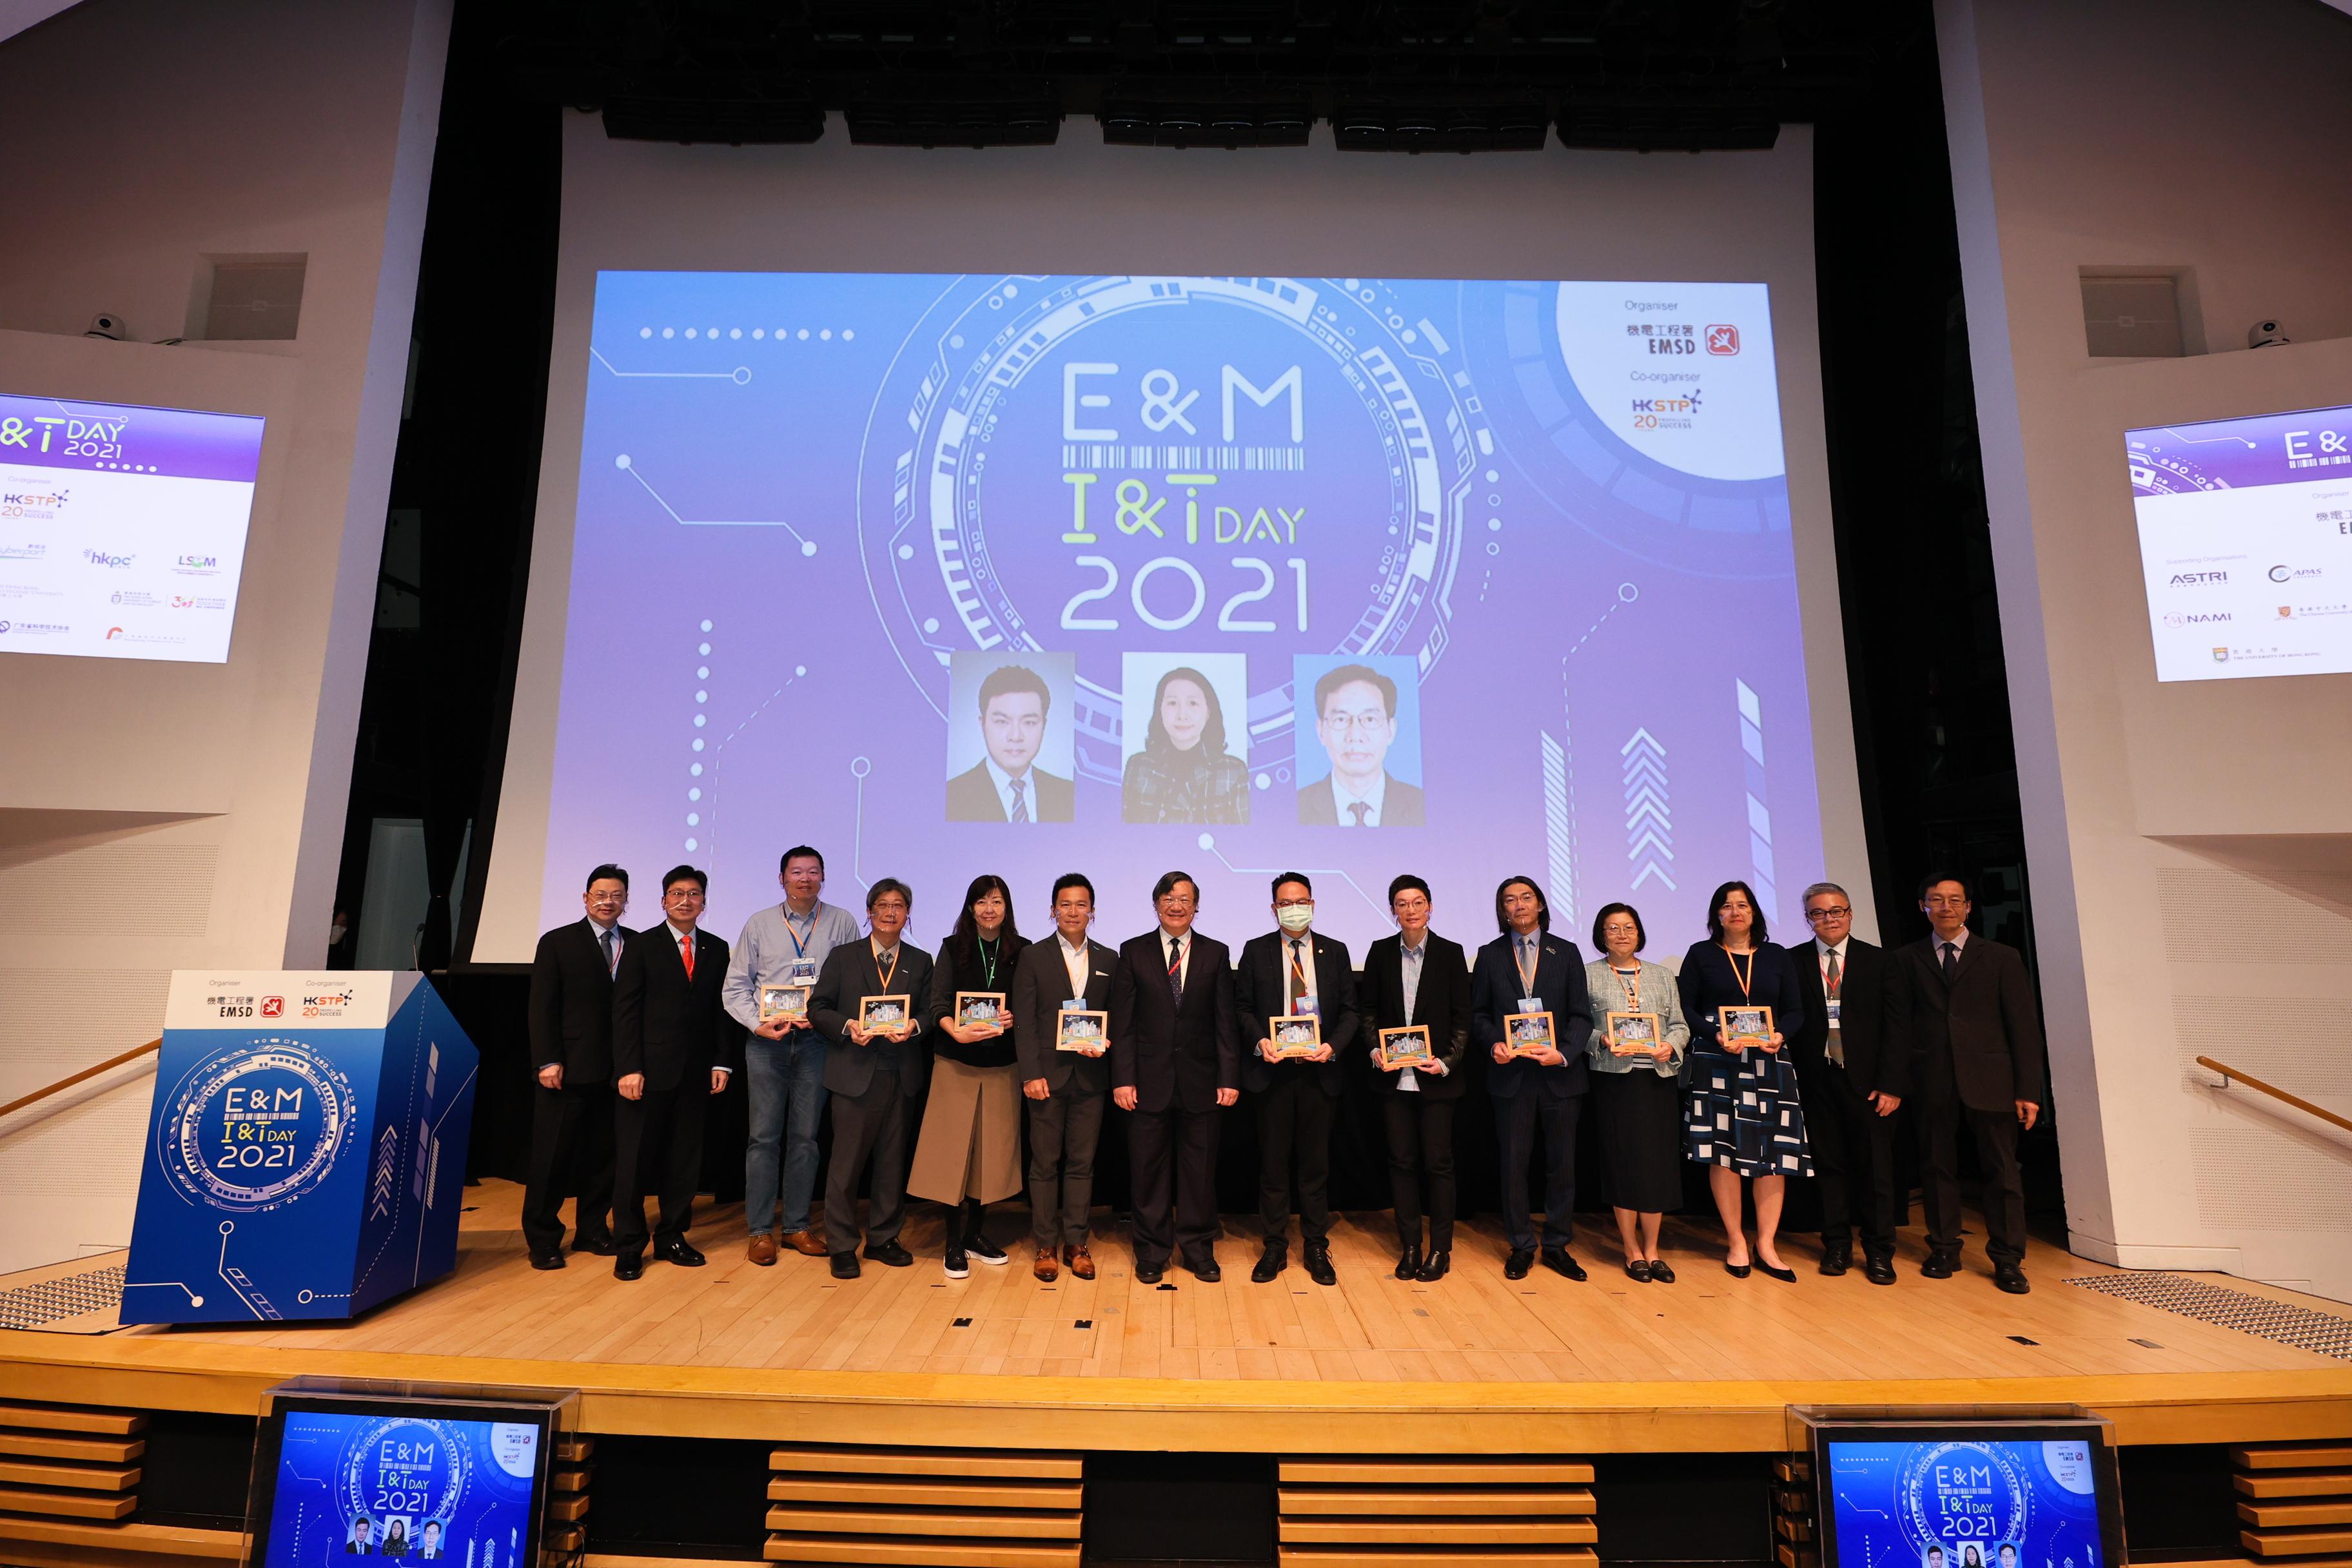 The "E&M I&T Day 2021" organised by the Electrical and Mechanical Services Department and co-organised by the Hong Kong Science and Technology Parks Corporation, has concluded successfully today (December 8). The Director of Electrical and Mechanical Services, Mr Eric Pang (seventh left), expressed gratitude to the co-organiser and the supporting organisations.